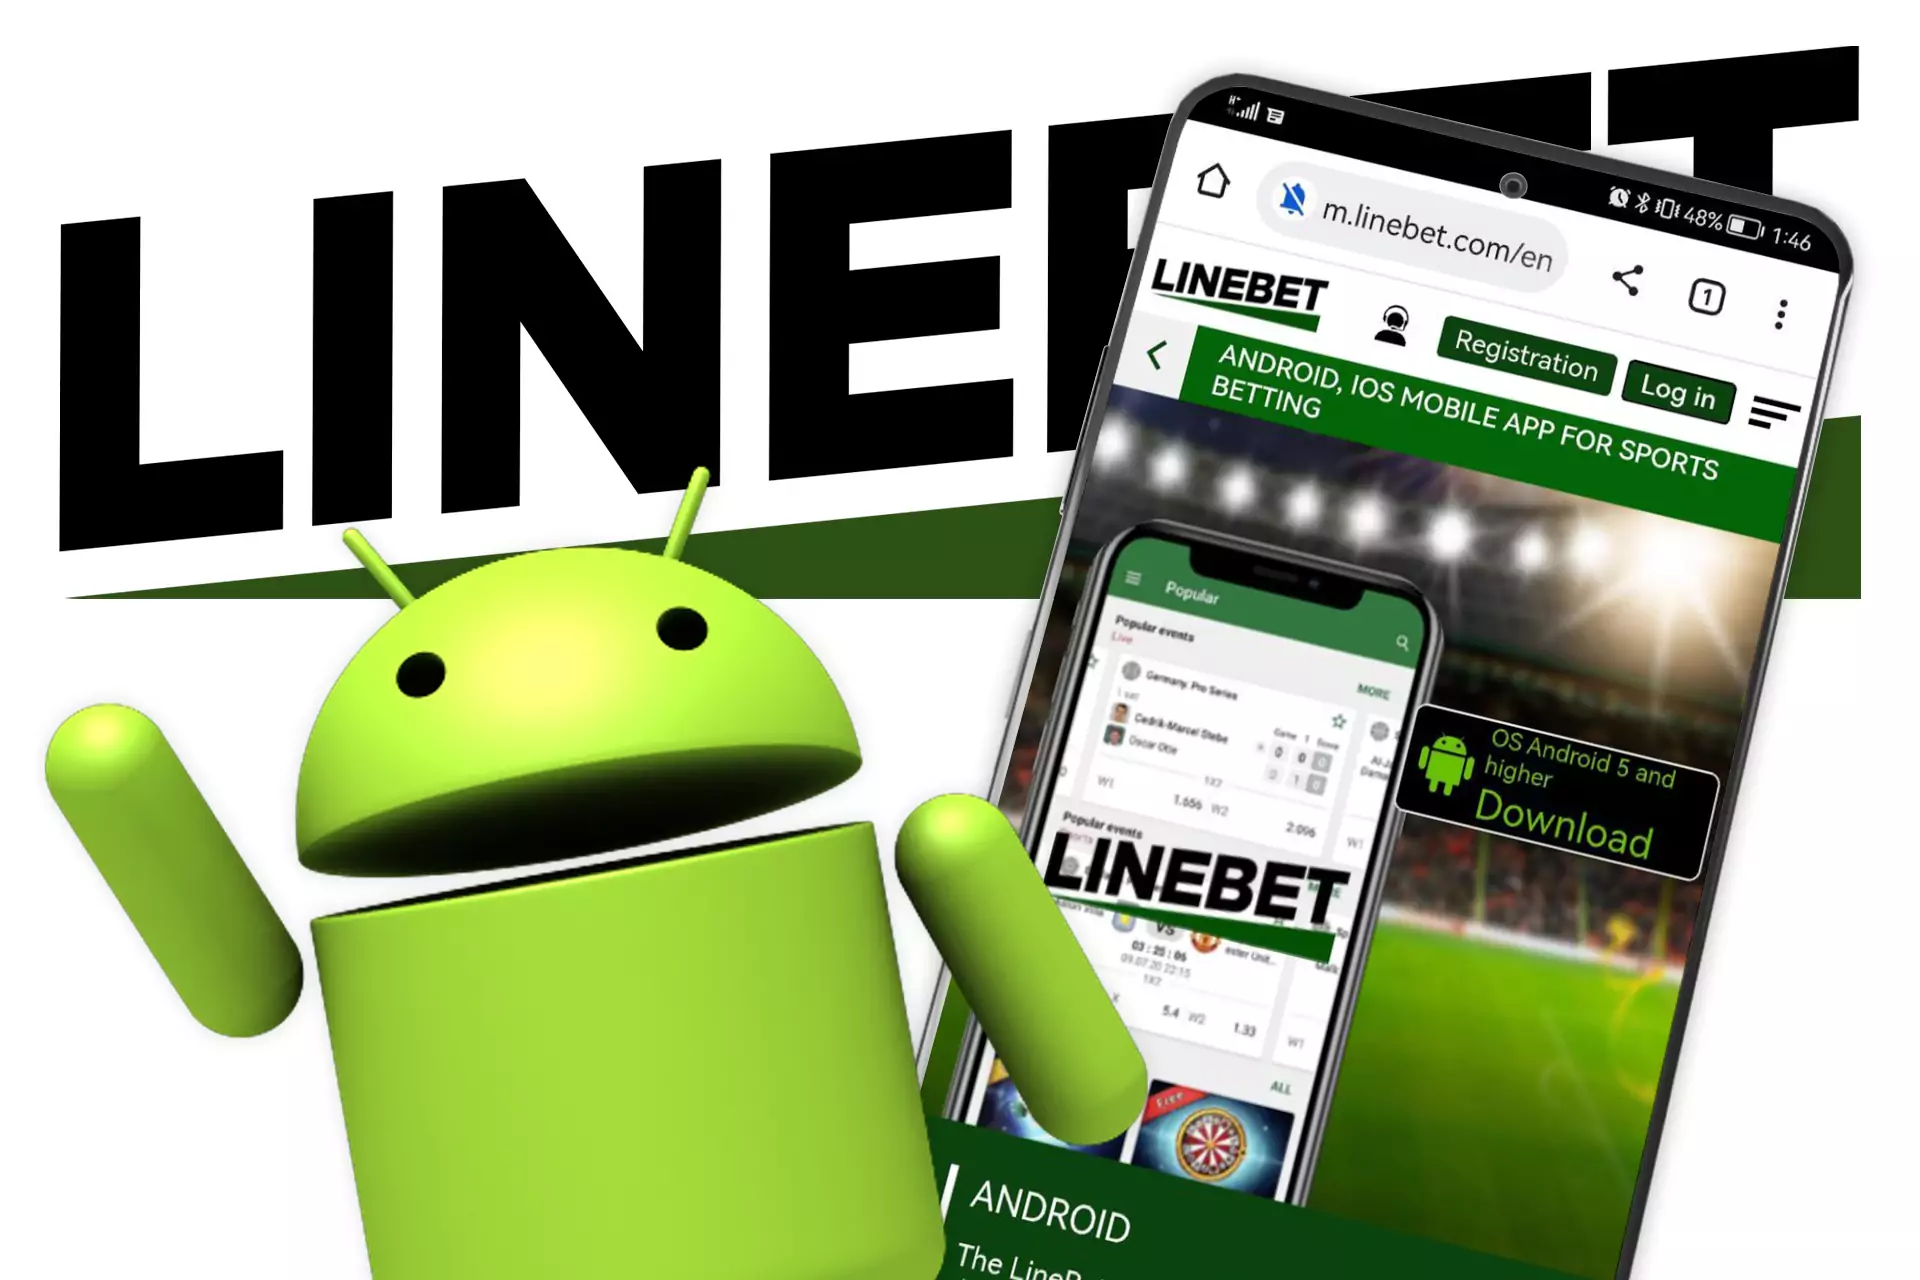 There is a mobile app of Linebet developed for Android devices.